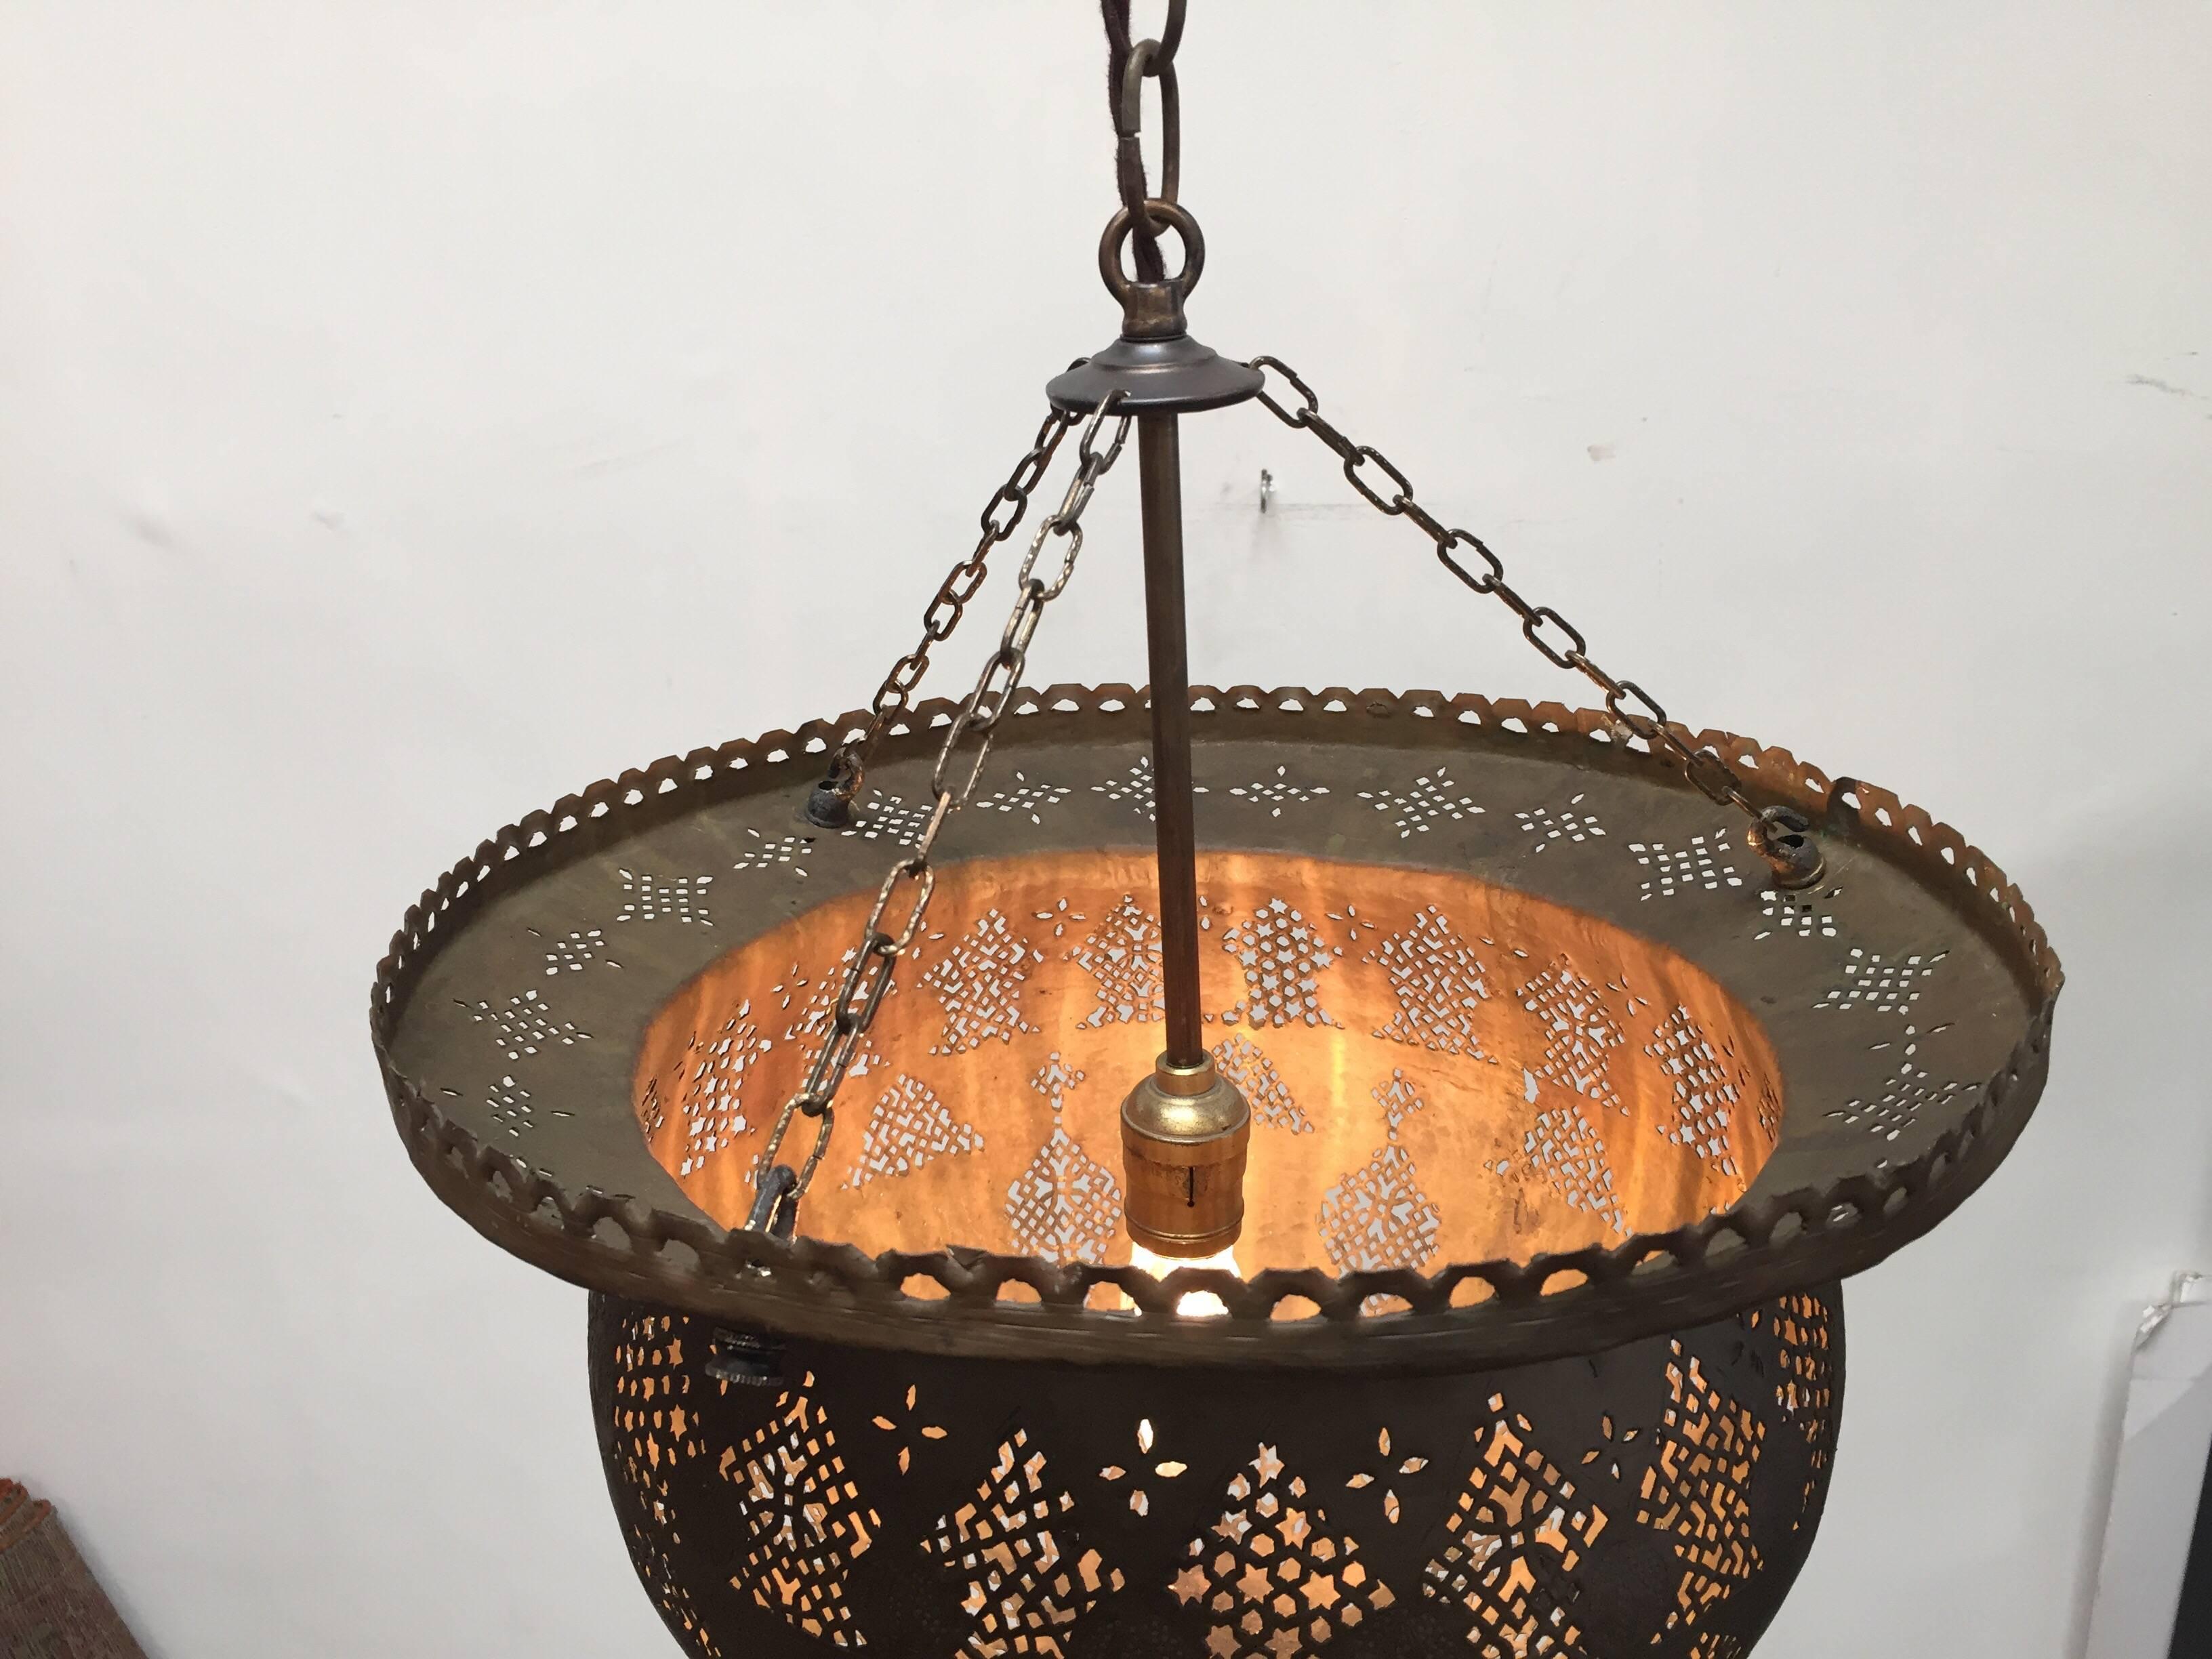 Antique 19th century handcrafted Moorish pierced brass Turkish Ottoman pendant chandelier.
The brass hanging lamp with open work design is delicately hand-hammered and chiseled with Arabic Kufic calligraphy writing and fine filigree floral patterns